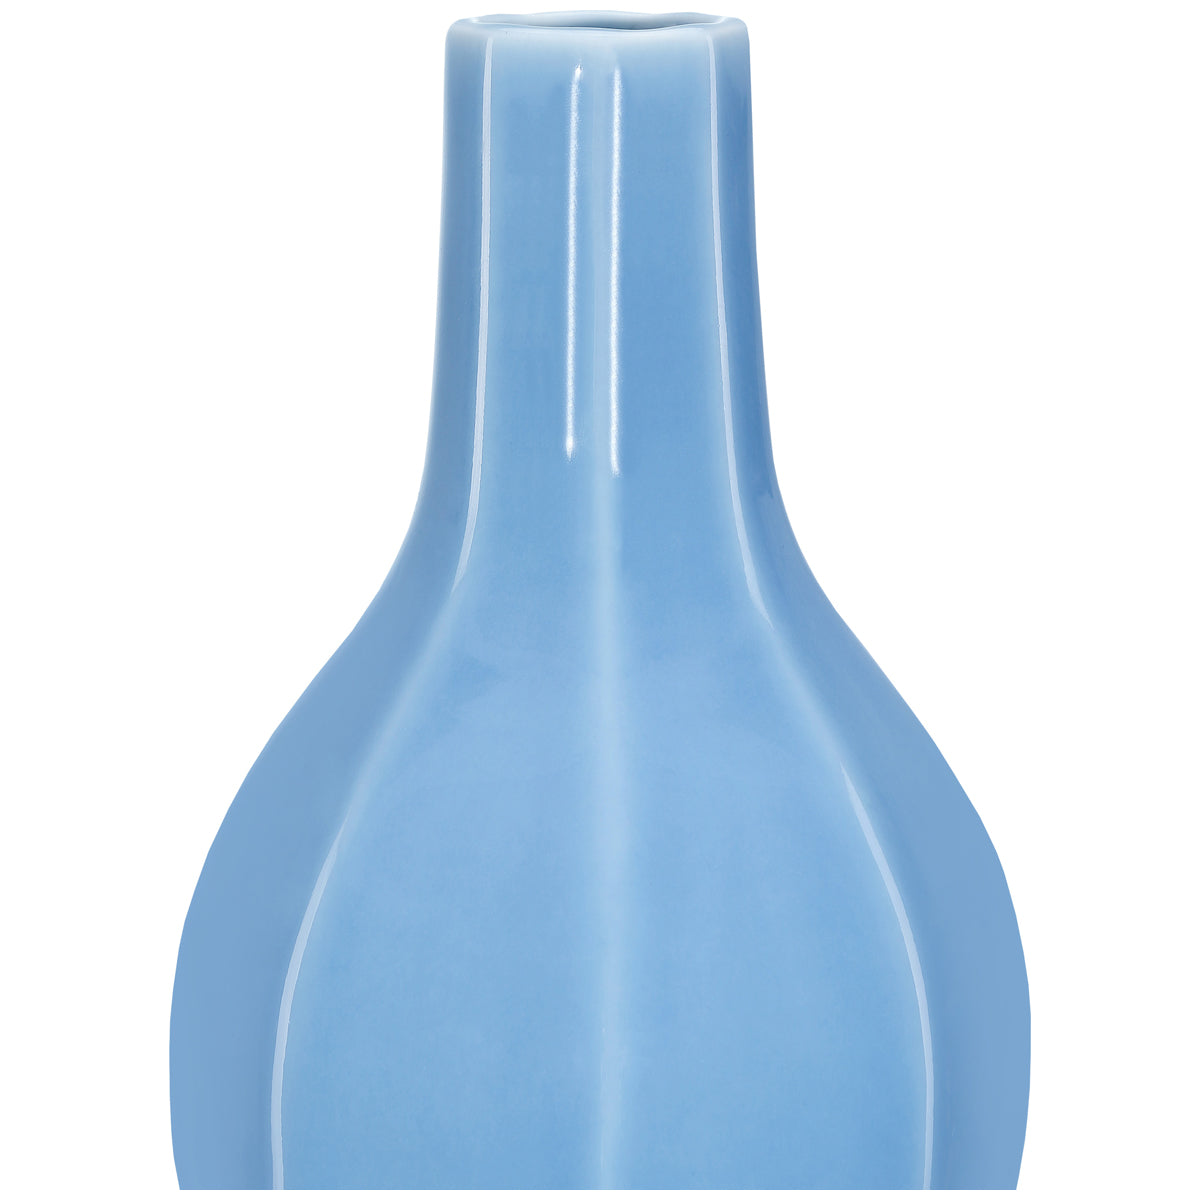 Currey and Company Sky Blue Octagonal Double Gourd Vase